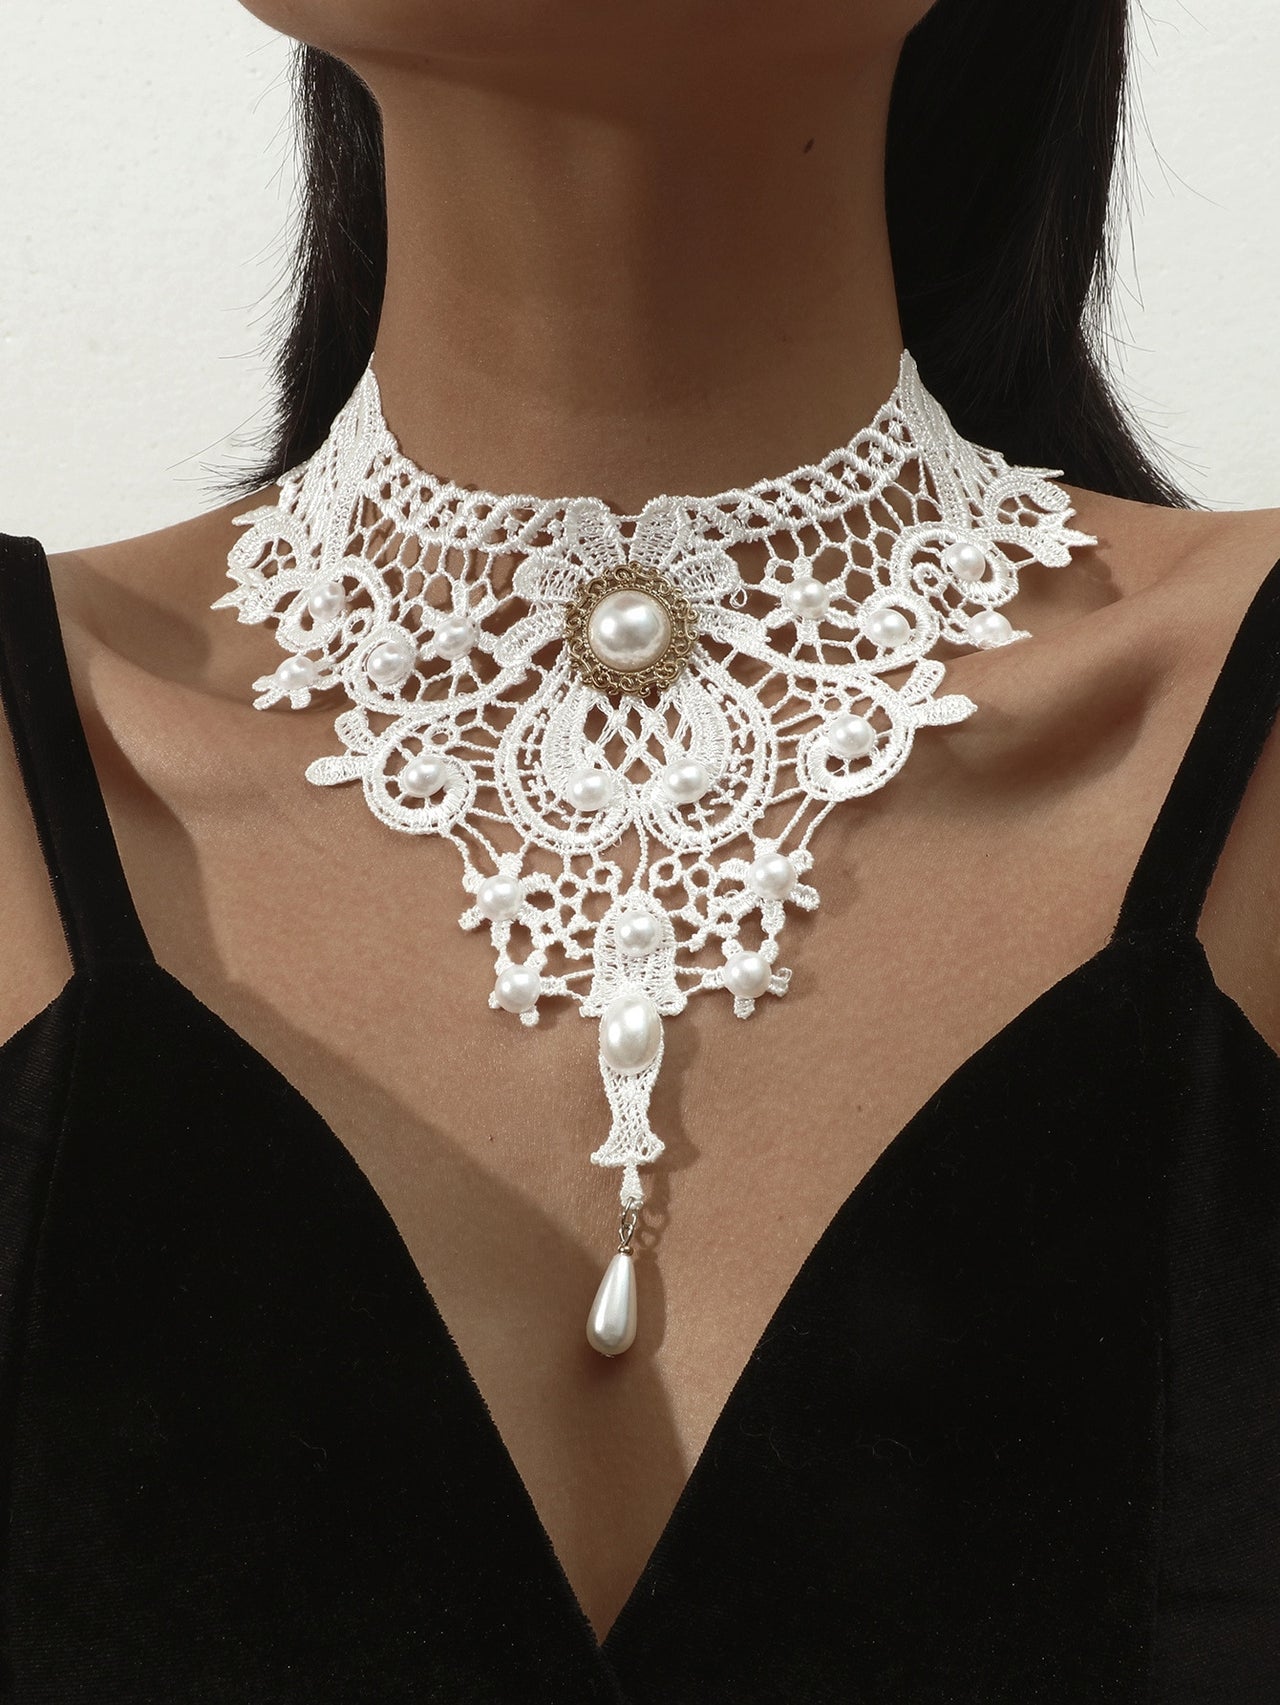 Lace Ladies Necklace Women's Exaggerated Black Clavicle Chain Collar